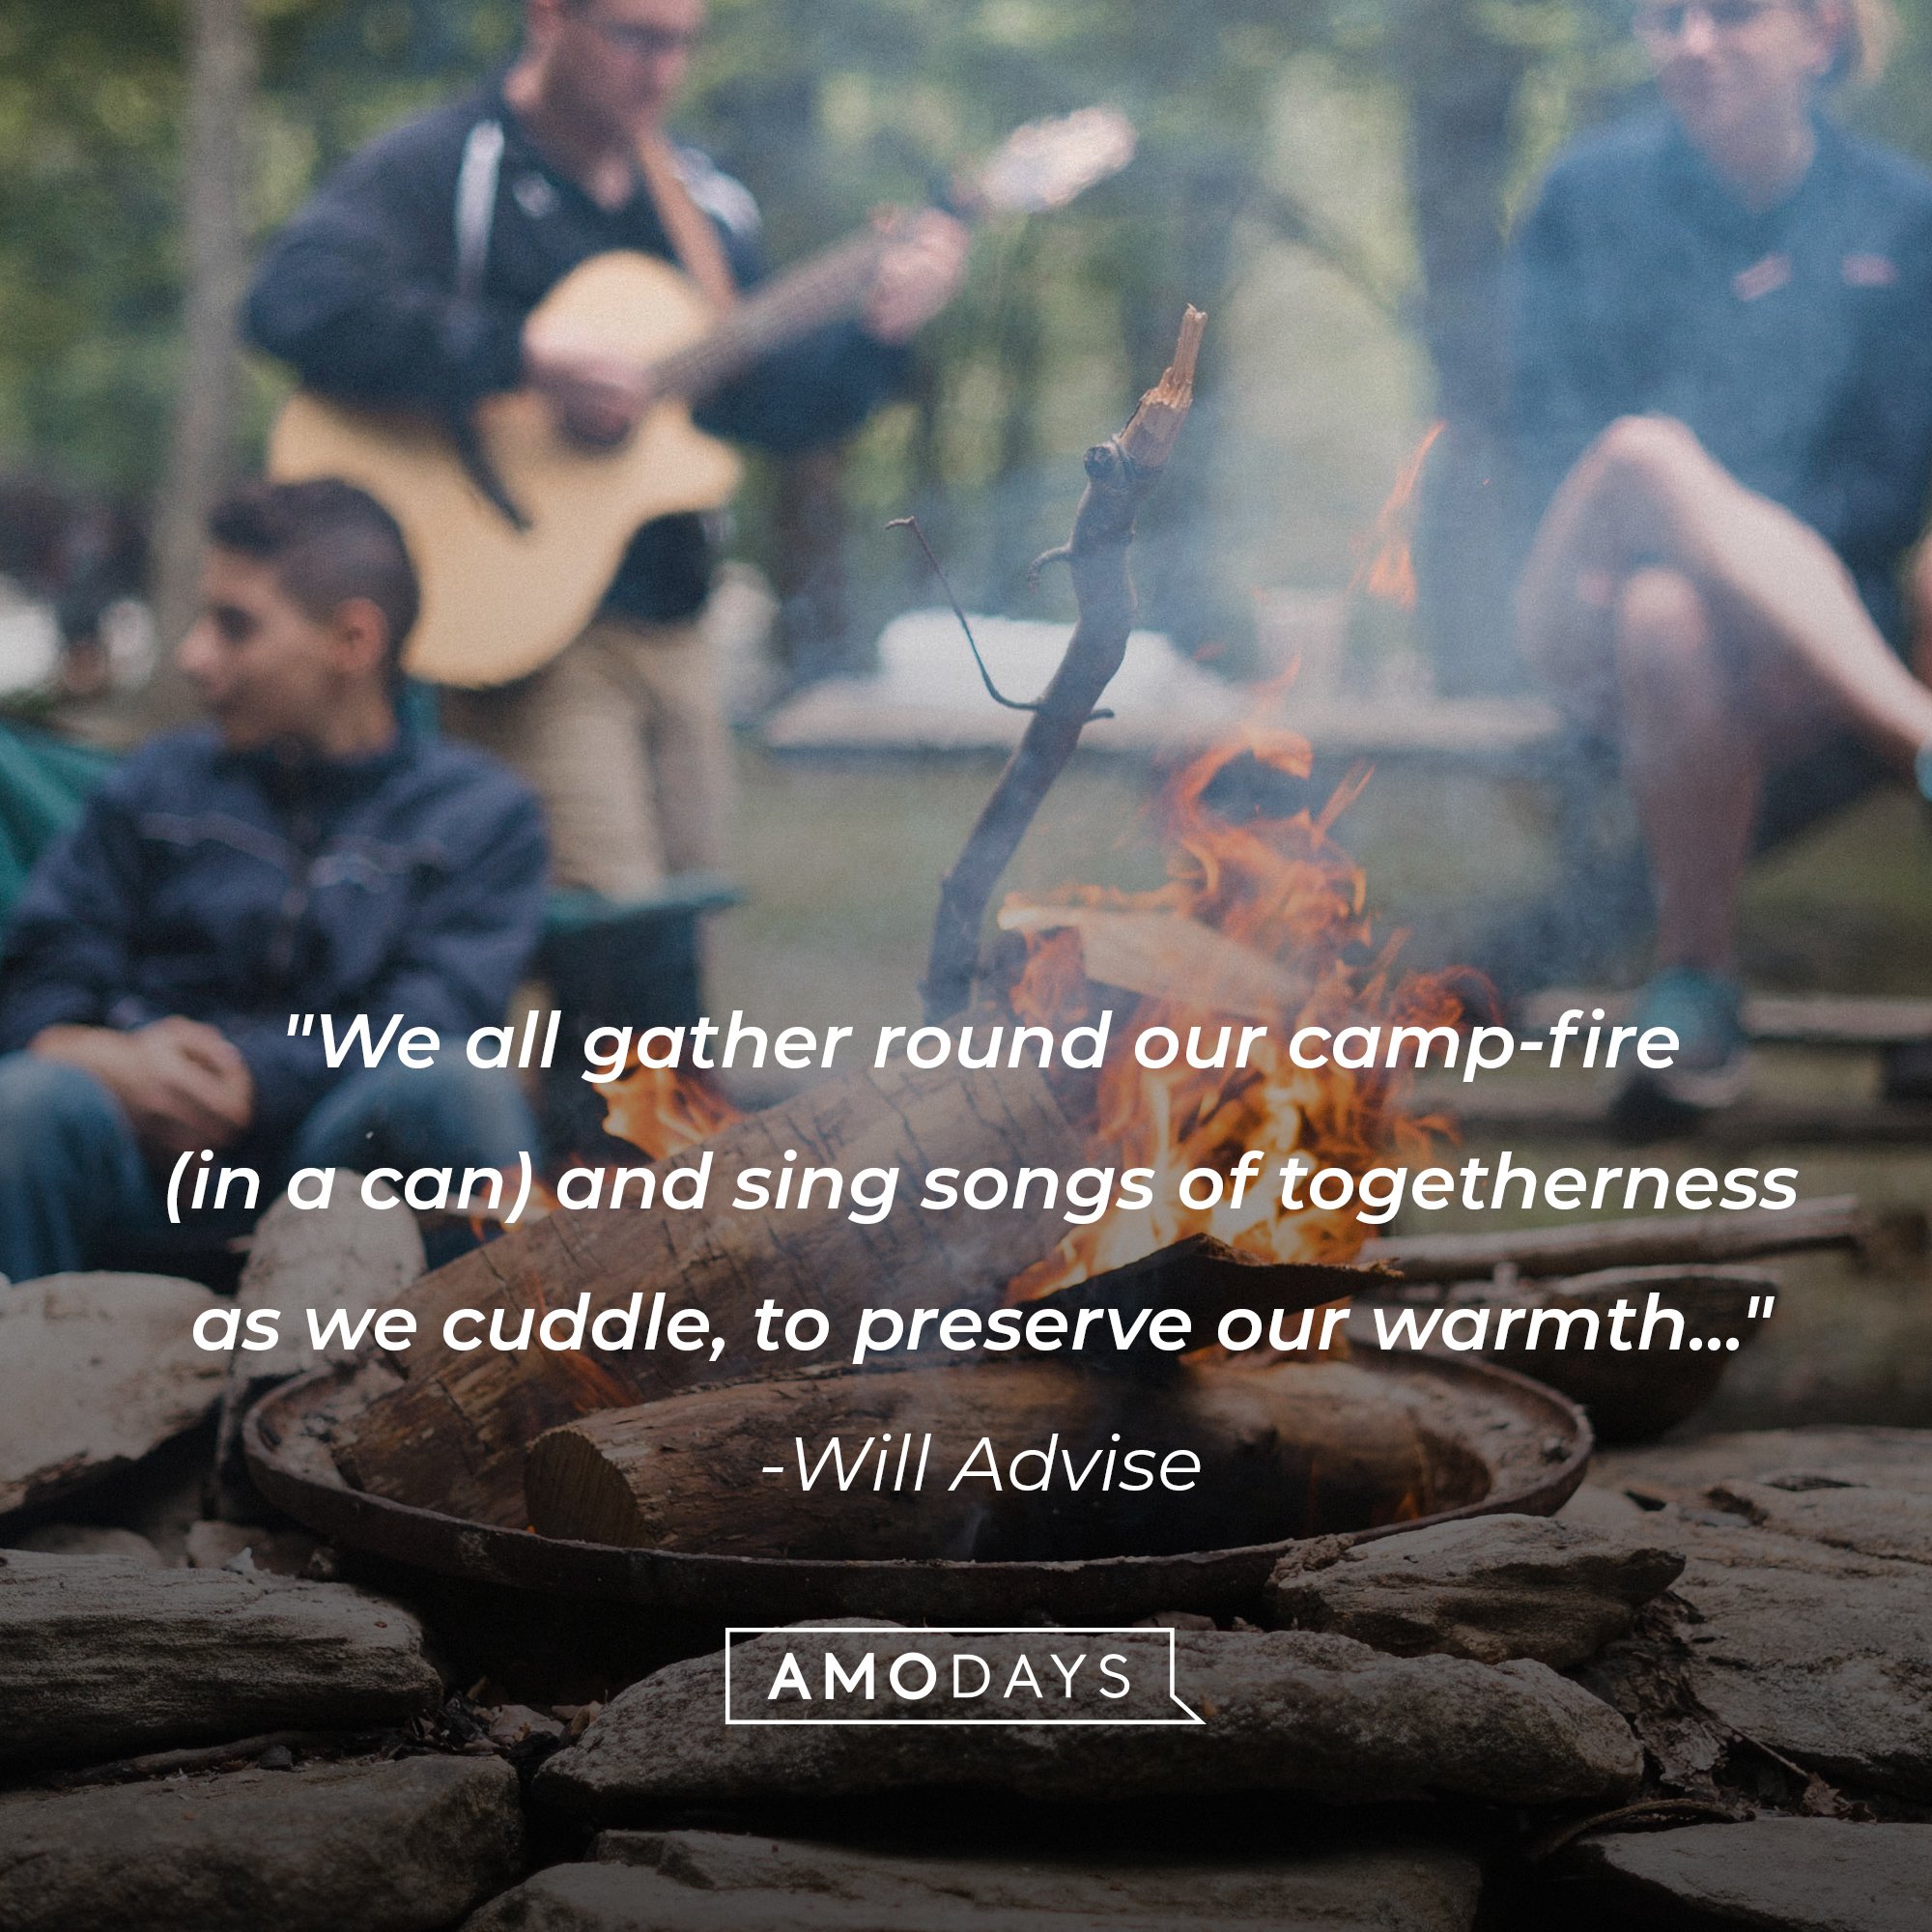 Will Advise's quote: "We all gather round our camp-fire (in a can) and sing songs of togetherness as we cuddle, to preserve our warmth..." | Image: AmoDays